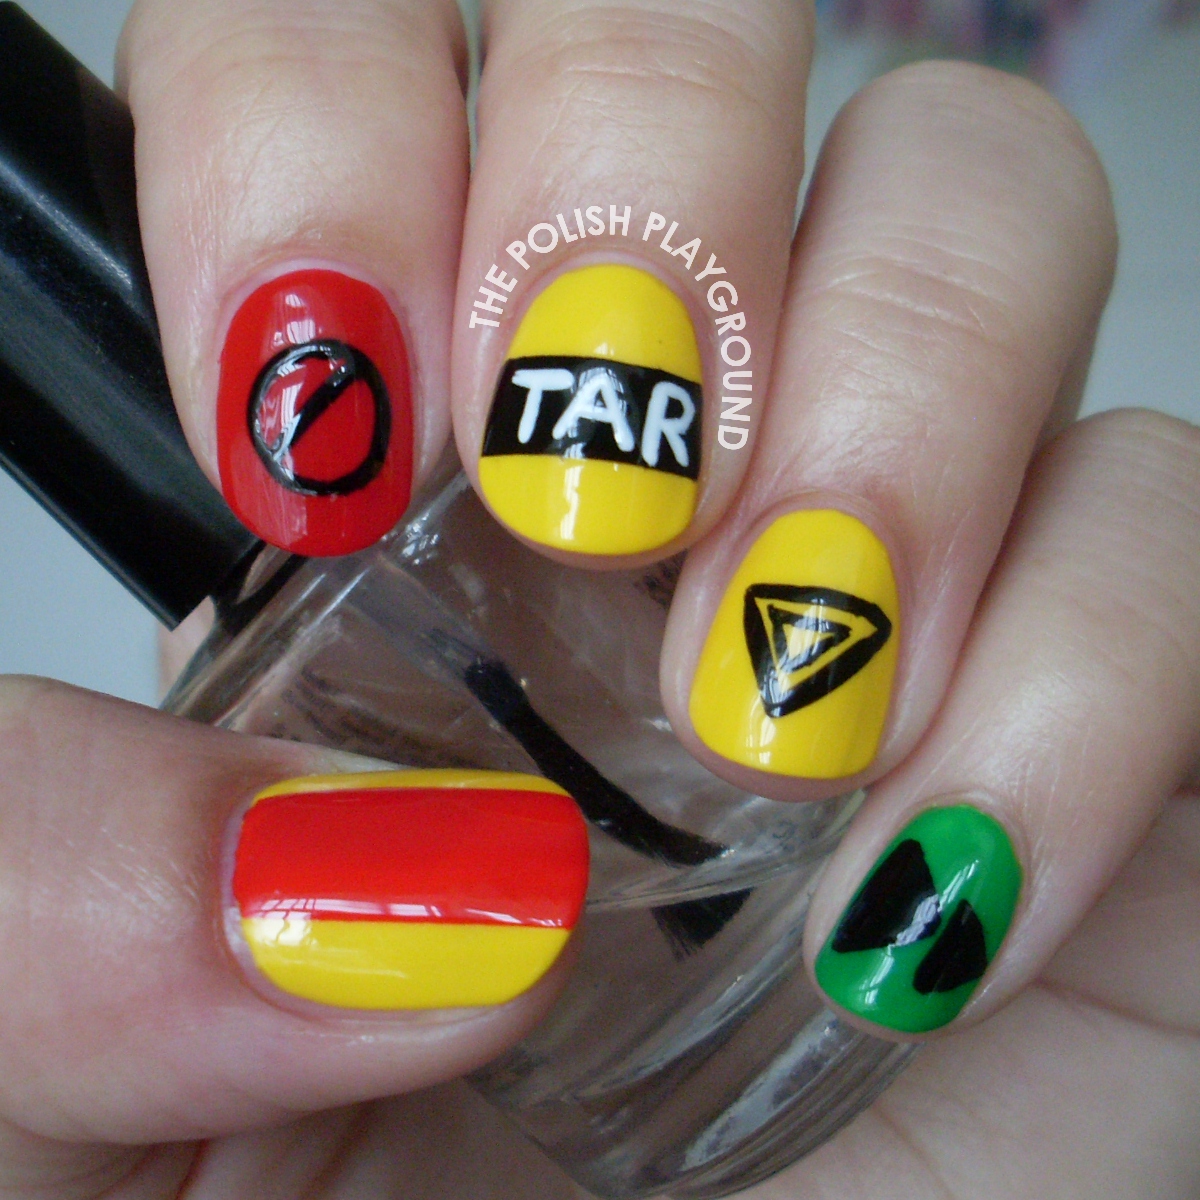 The Amazing Race Inspired Nail Art